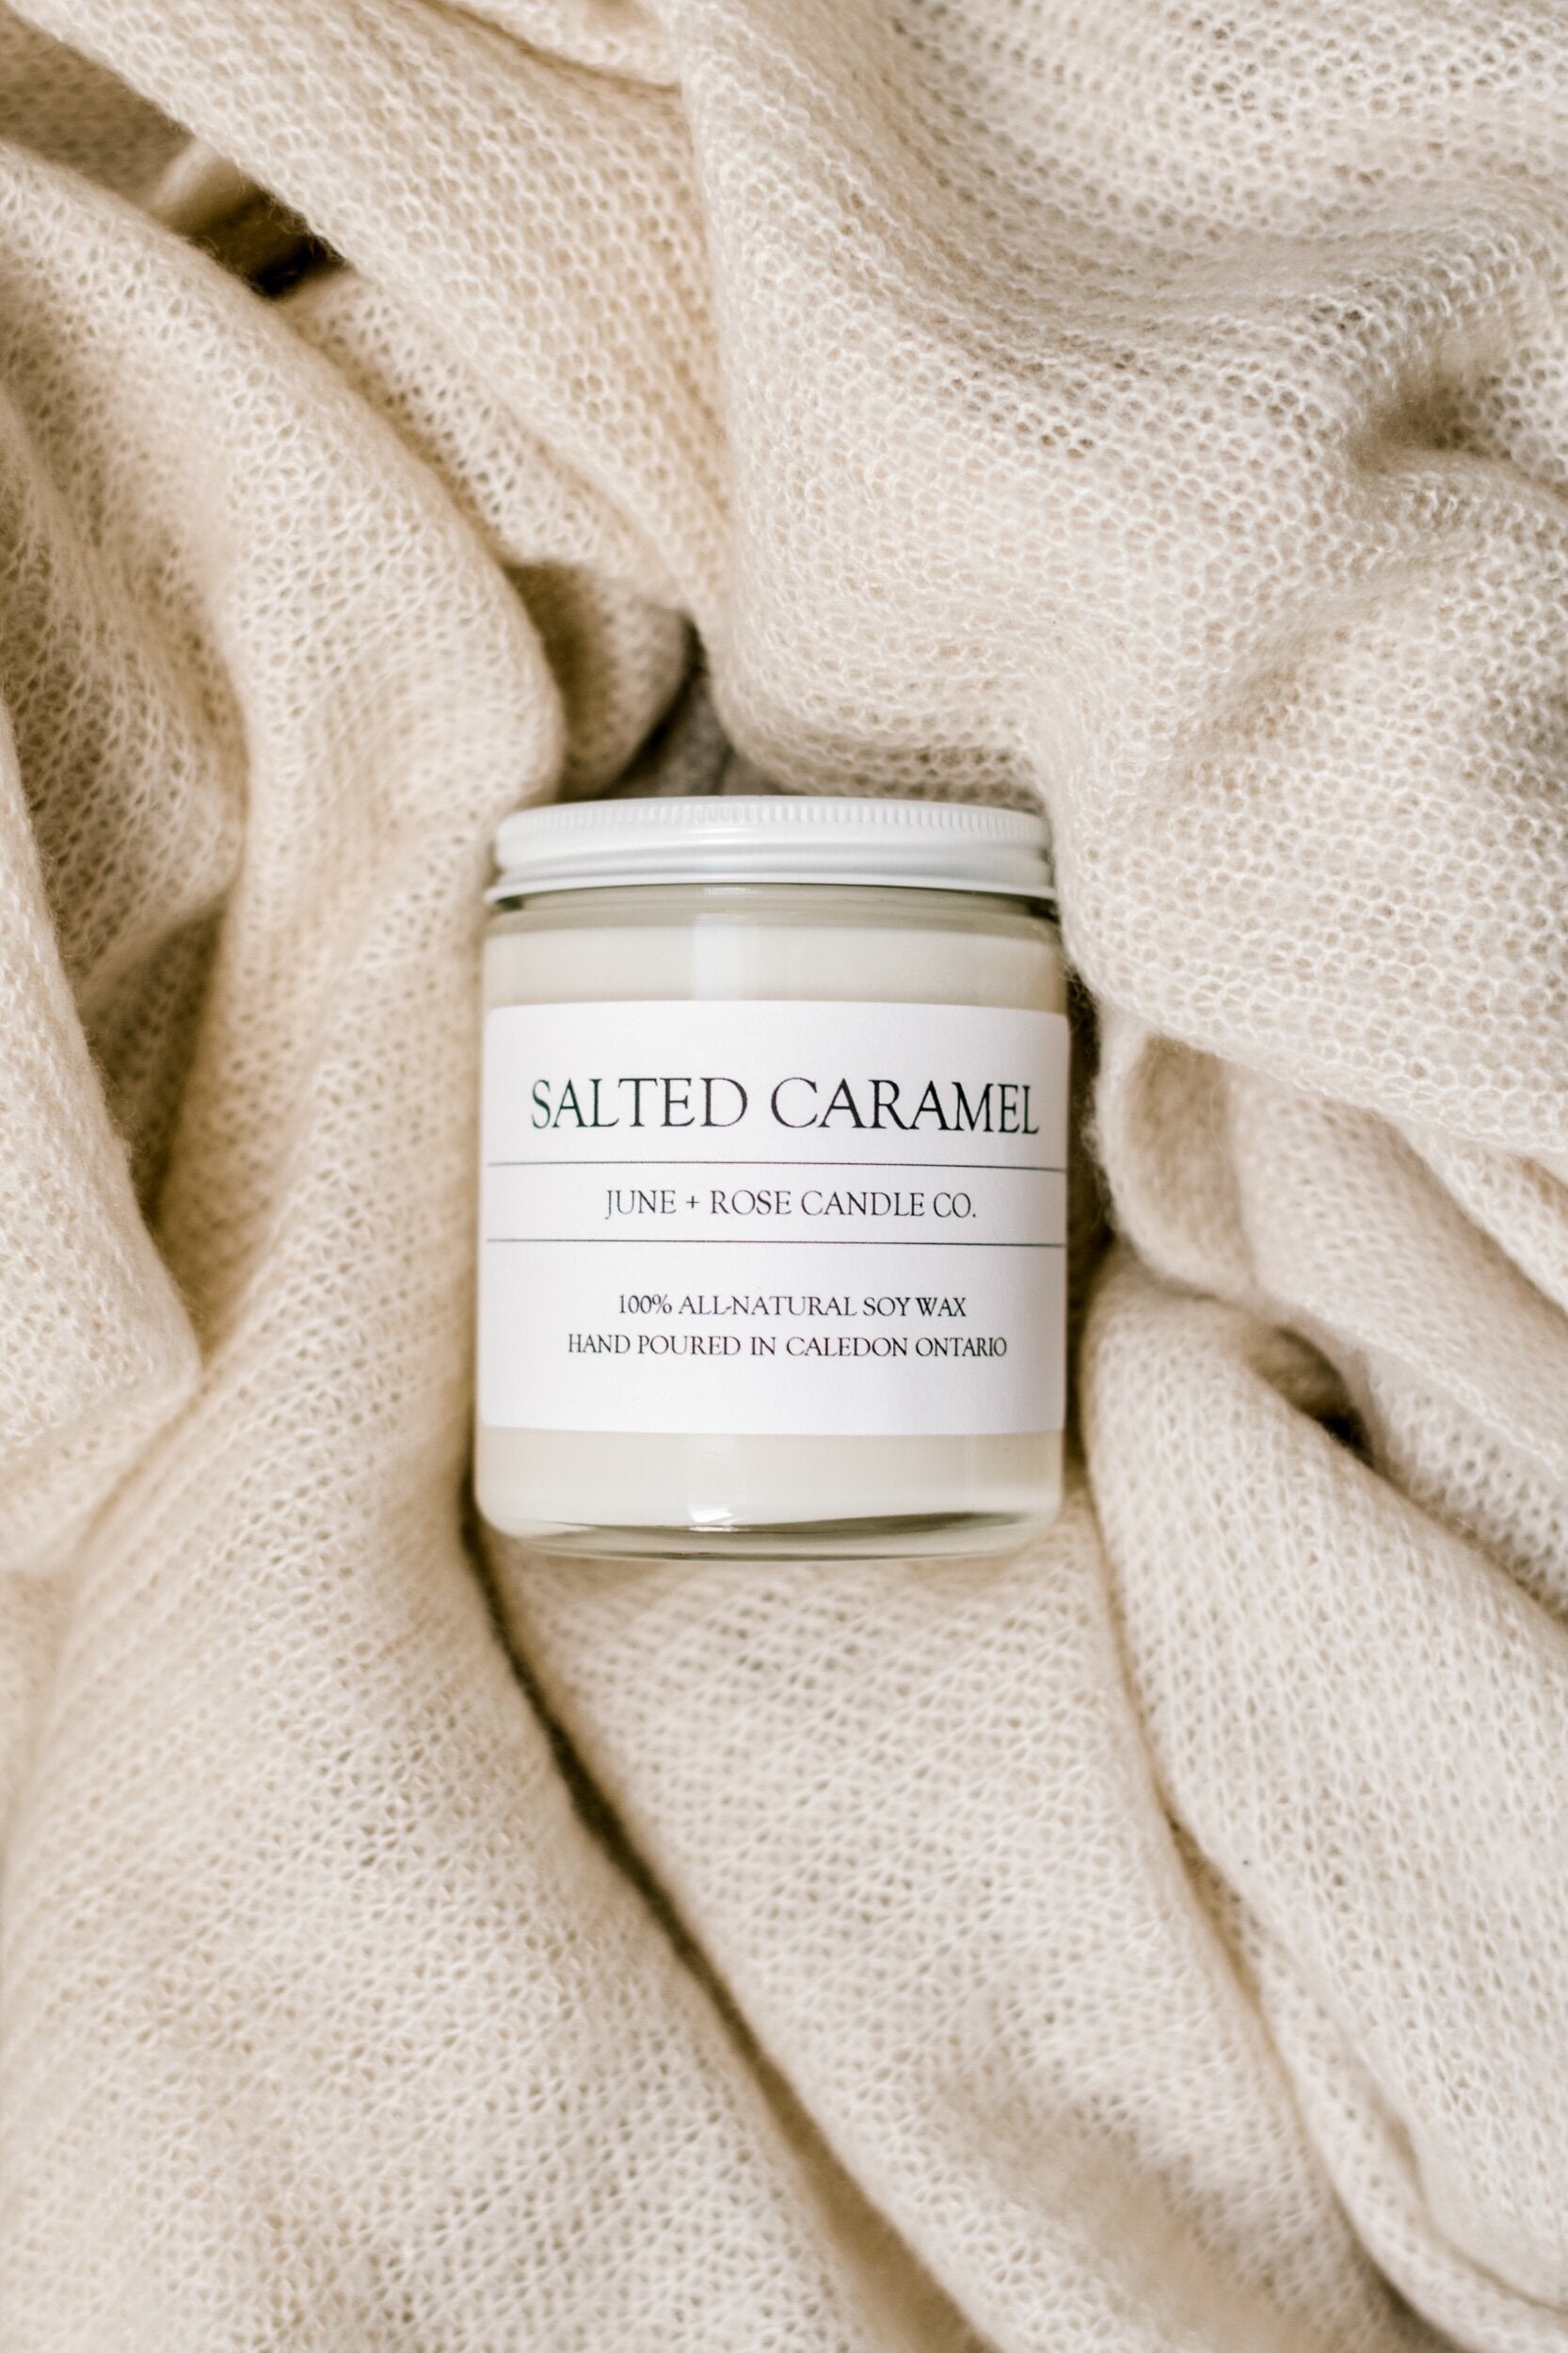 Salted Caramel Candle (June+Rose Candle Co)